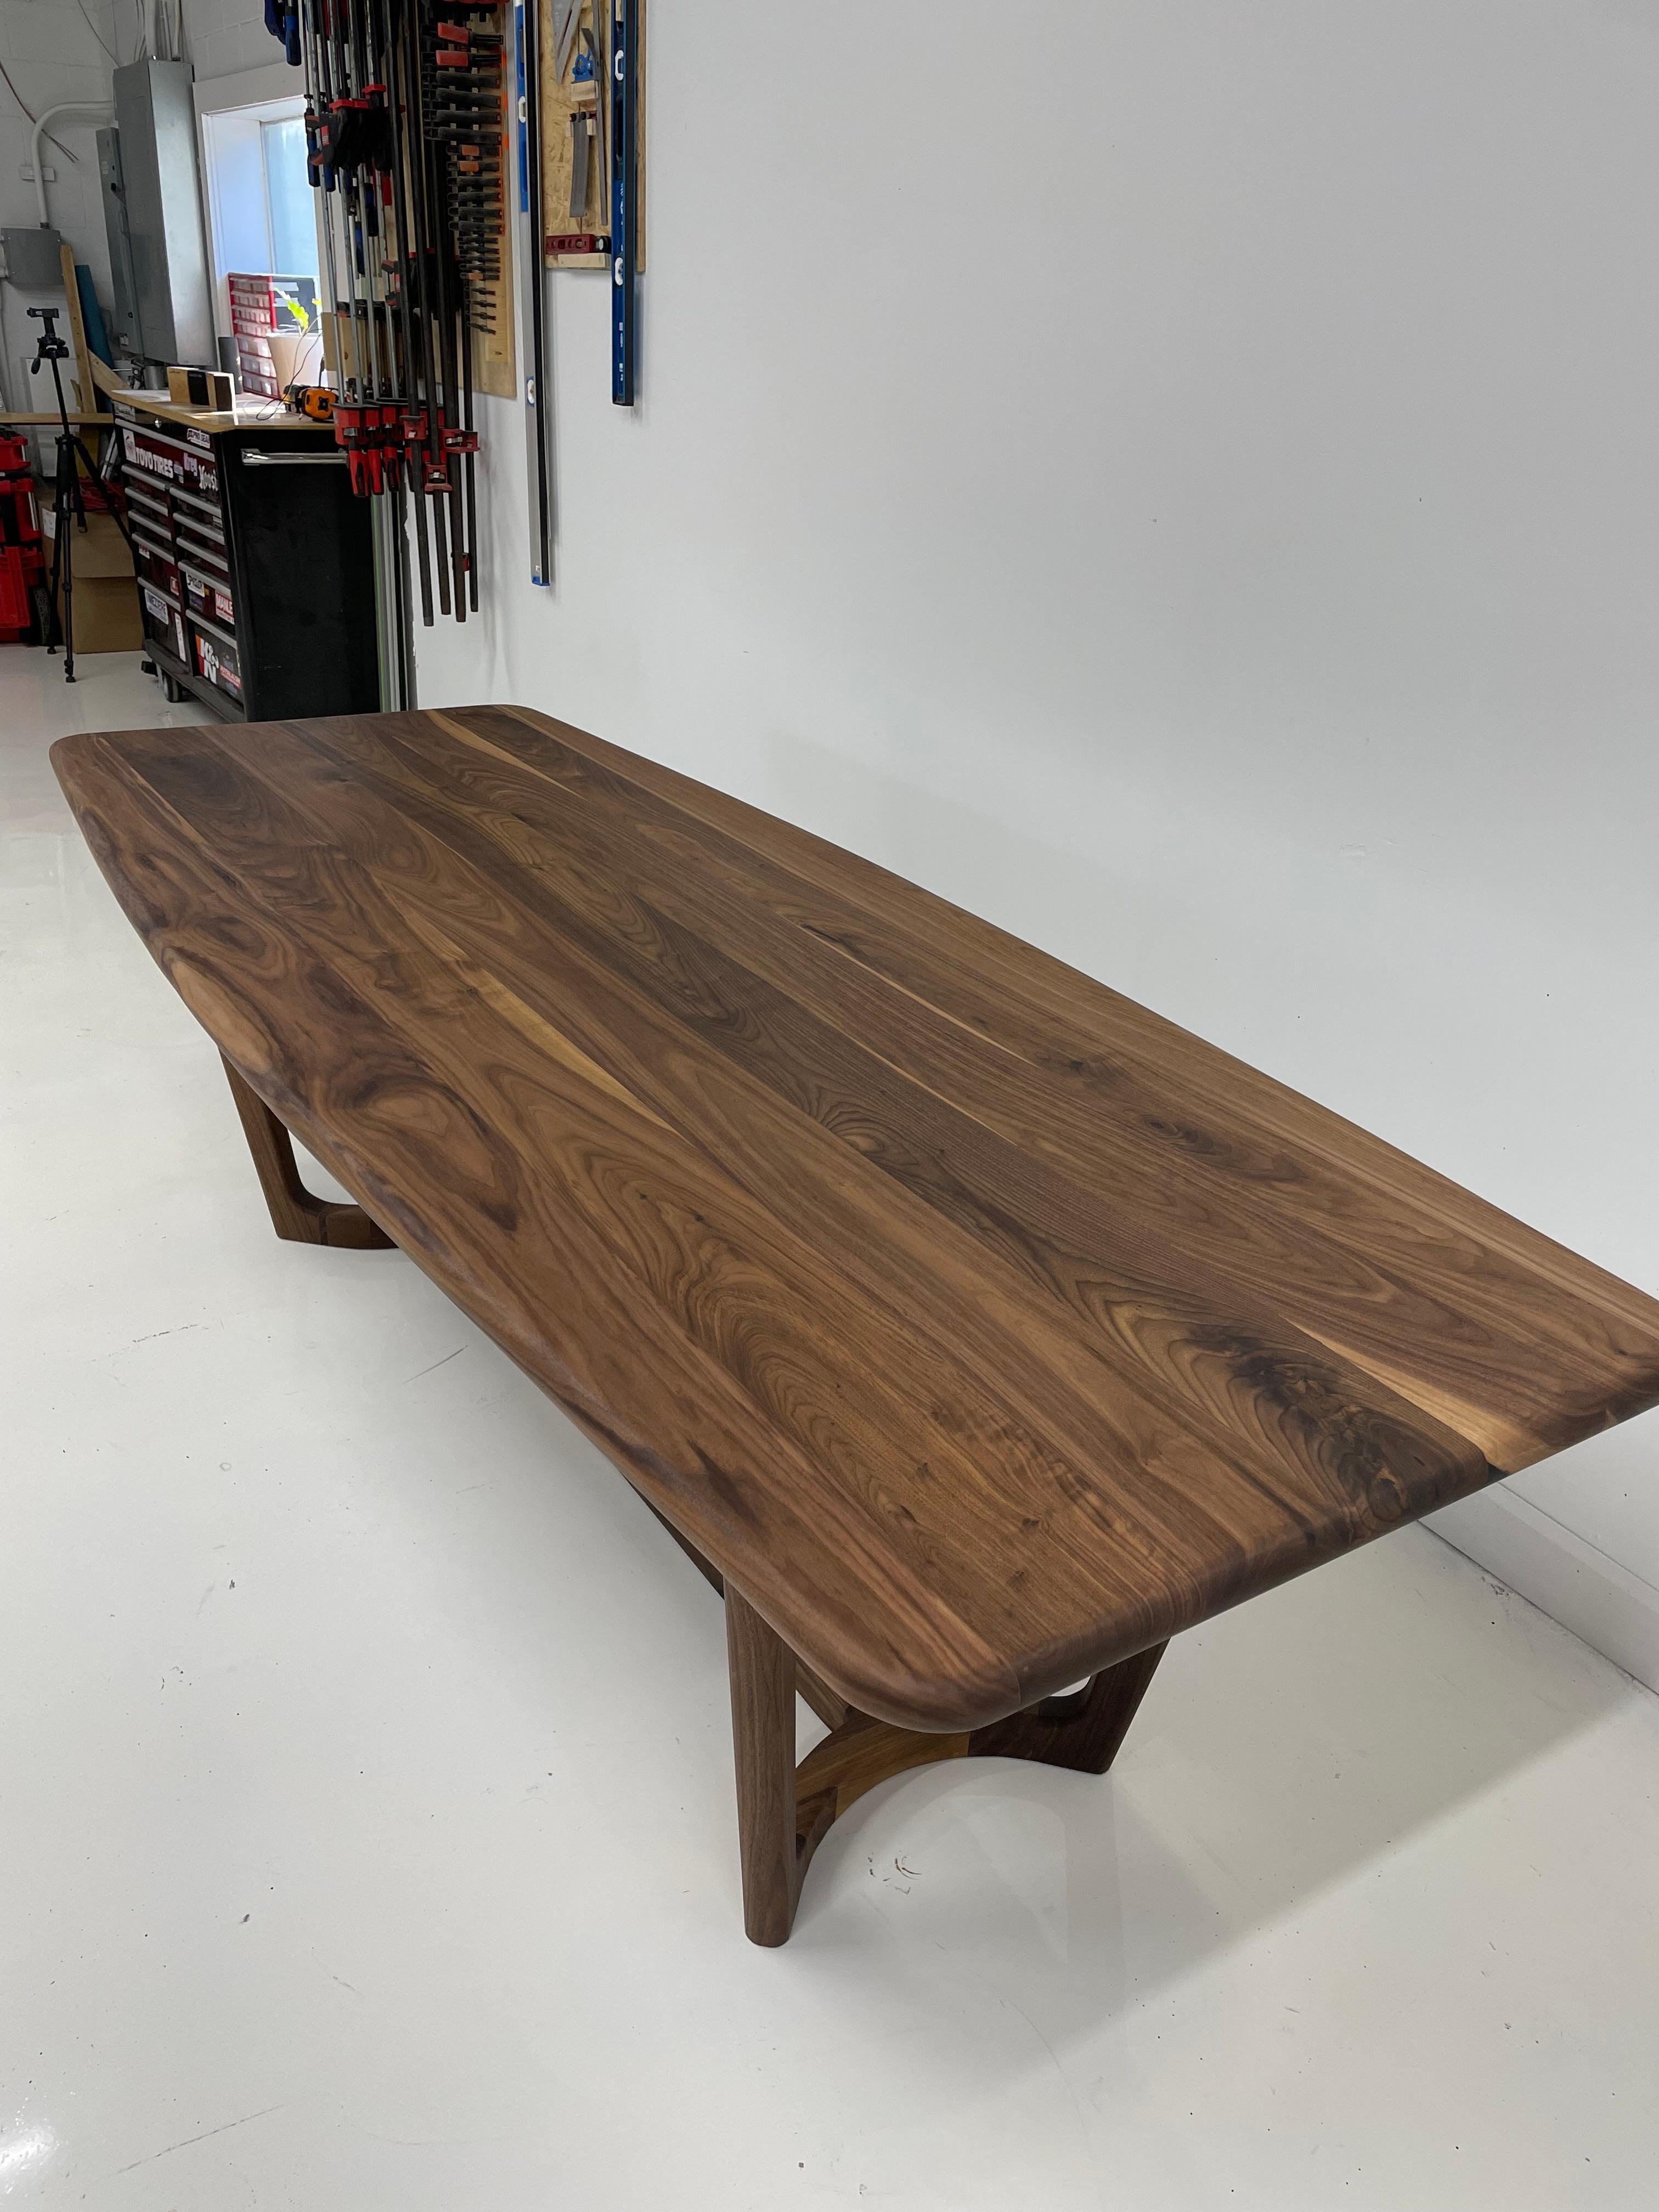 A beautiful Mid-Century Modern take on the dining table. Made out of solid Walnut, this table is made without a single sharpe edge giving it soft feel and keeping your space feeling light. A slight curve to the table top and gently tapered legs all